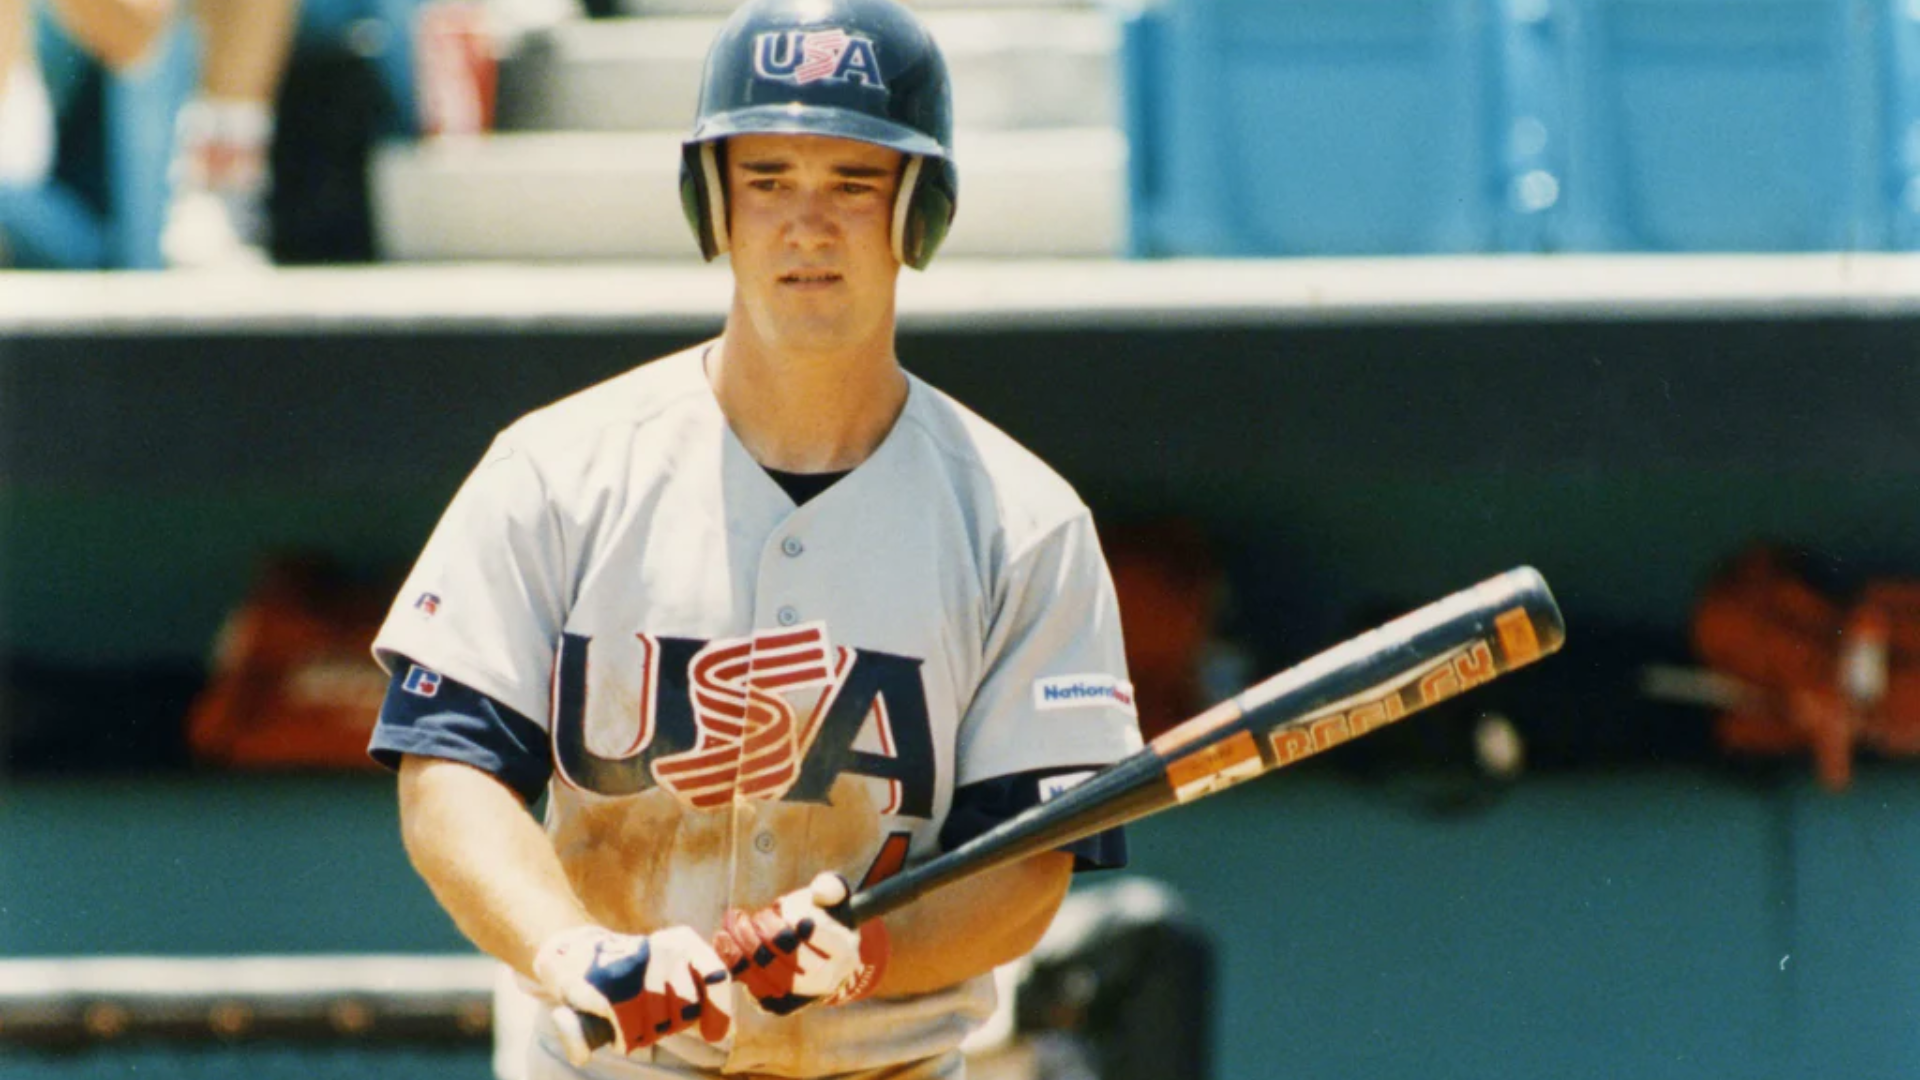 The Prospect League and the Olympics: Warren Morris